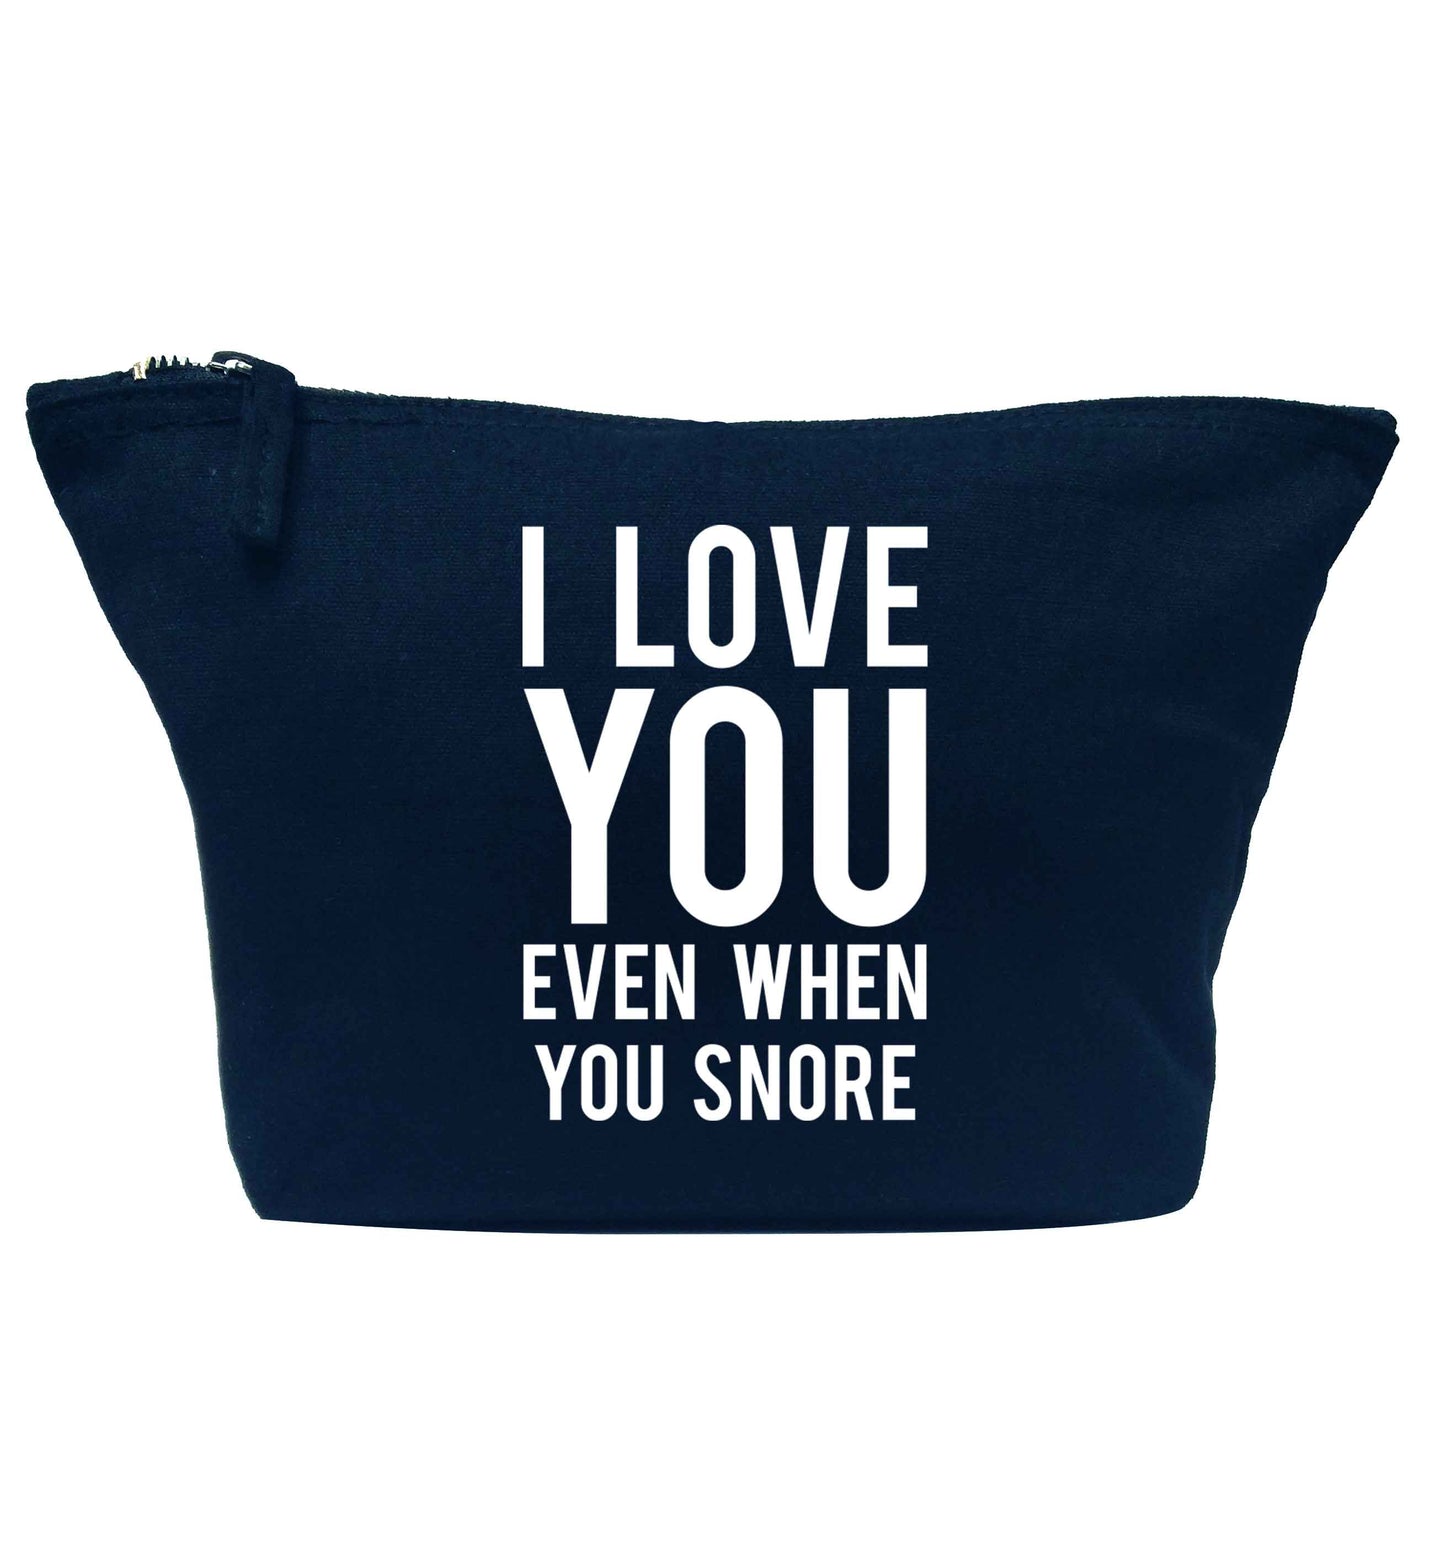 I love you even when you snore navy makeup bag